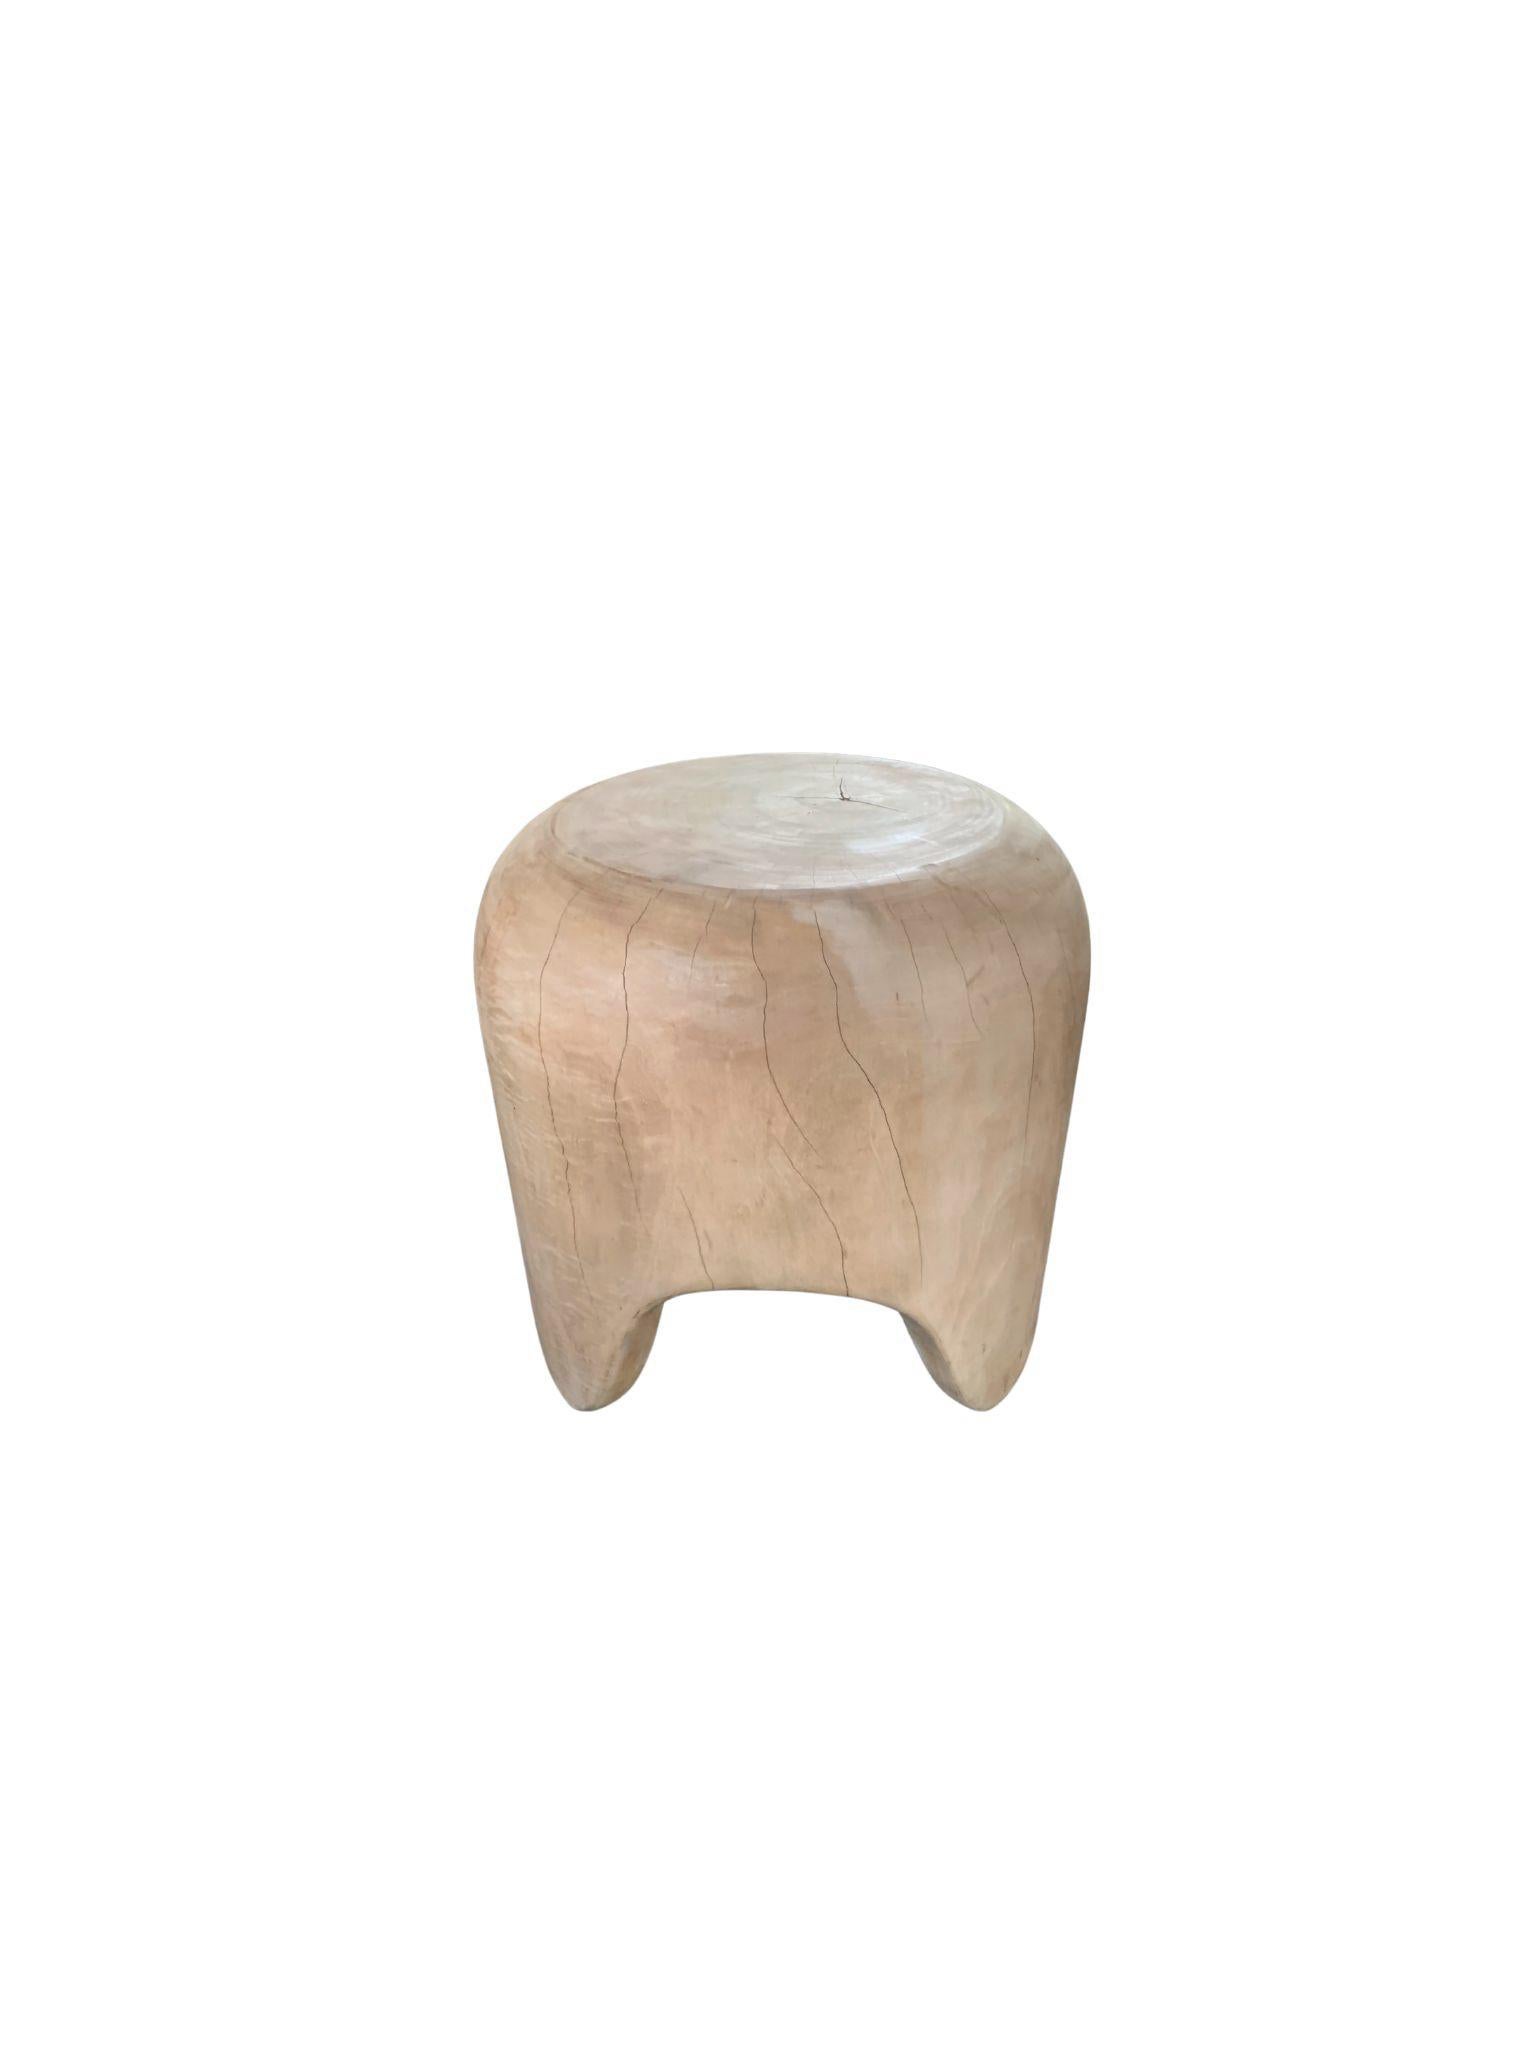 Organic Modern Sculptural Side Table Solid Mango Wood with Arched Legs For Sale